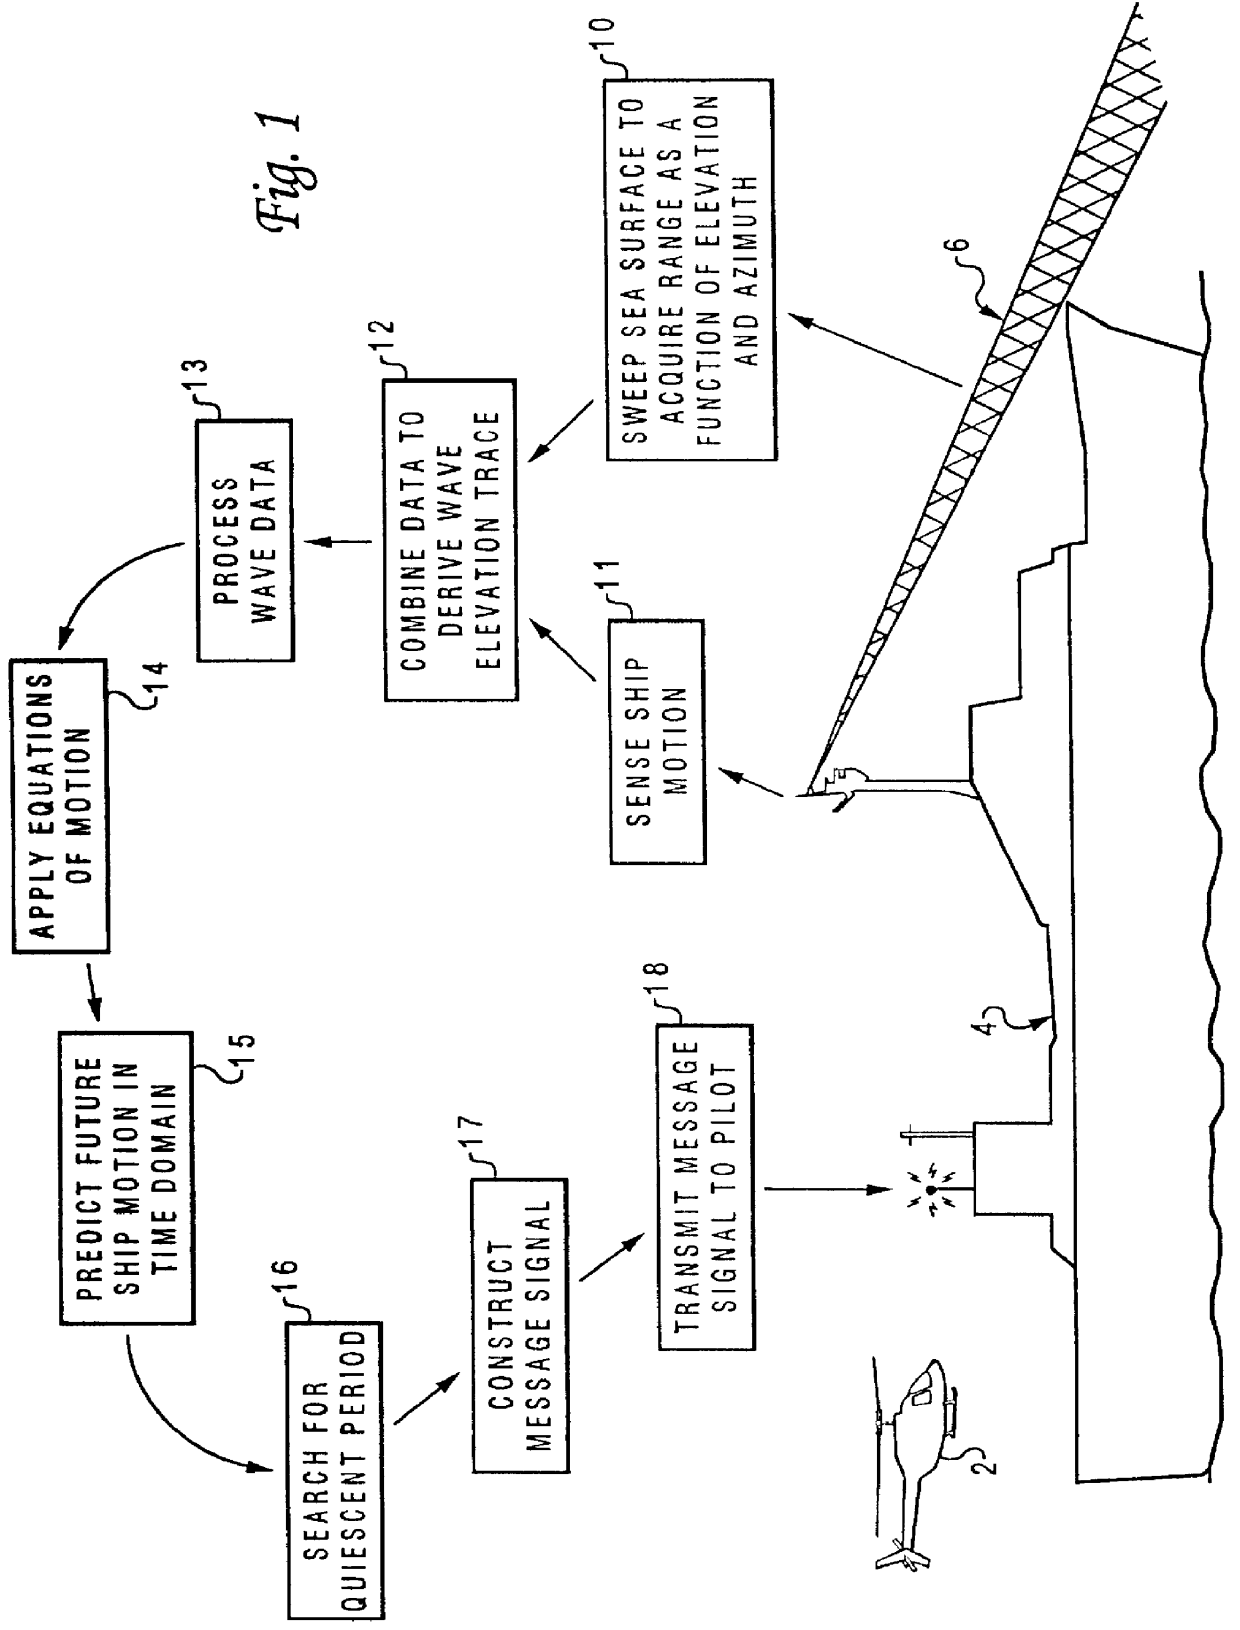 Method and system for predicting ship motion or the like to assist in helicopter landing